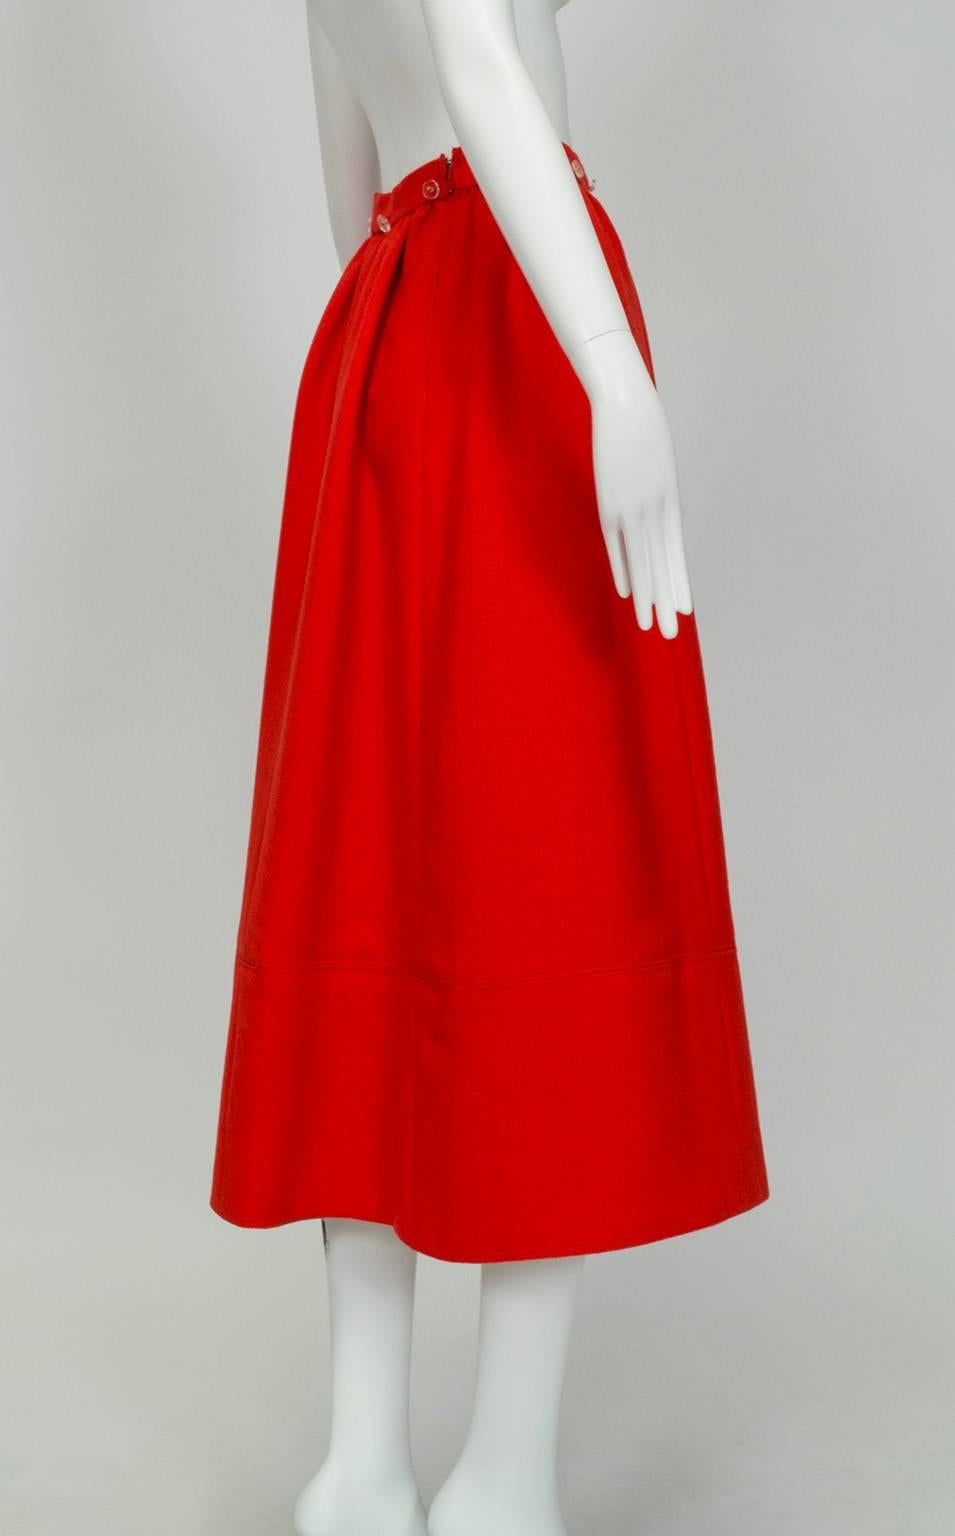 Norman Norell Heavyweight Red Gathered Hostess Skirt - Small, 1960s In Excellent Condition For Sale In Tucson, AZ